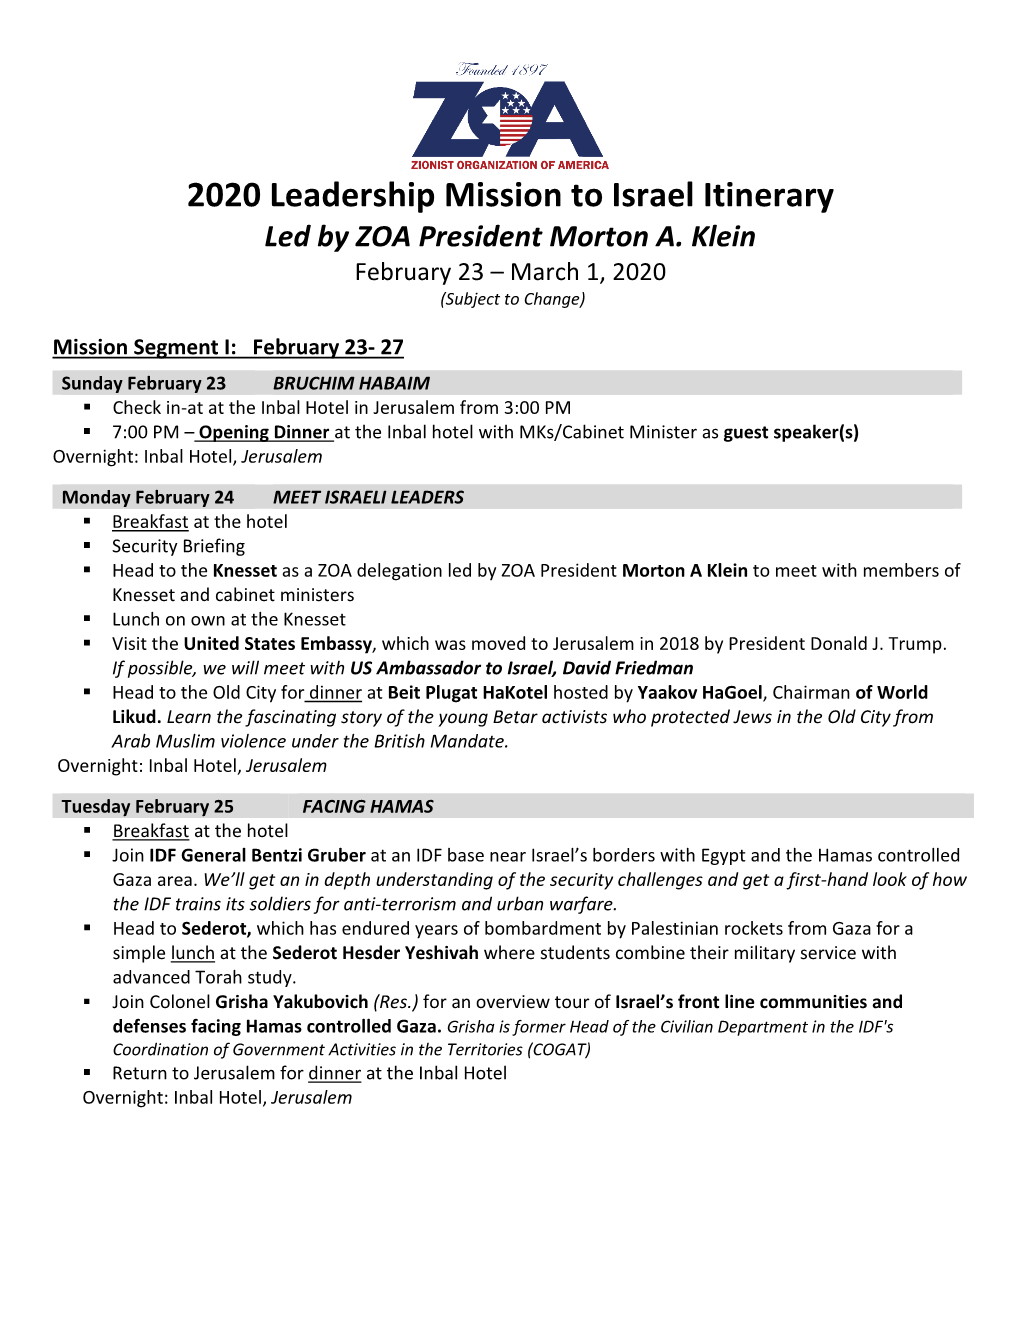 2020 Leadership Mission to Israel Itinerary Led by ZOA President Morton A